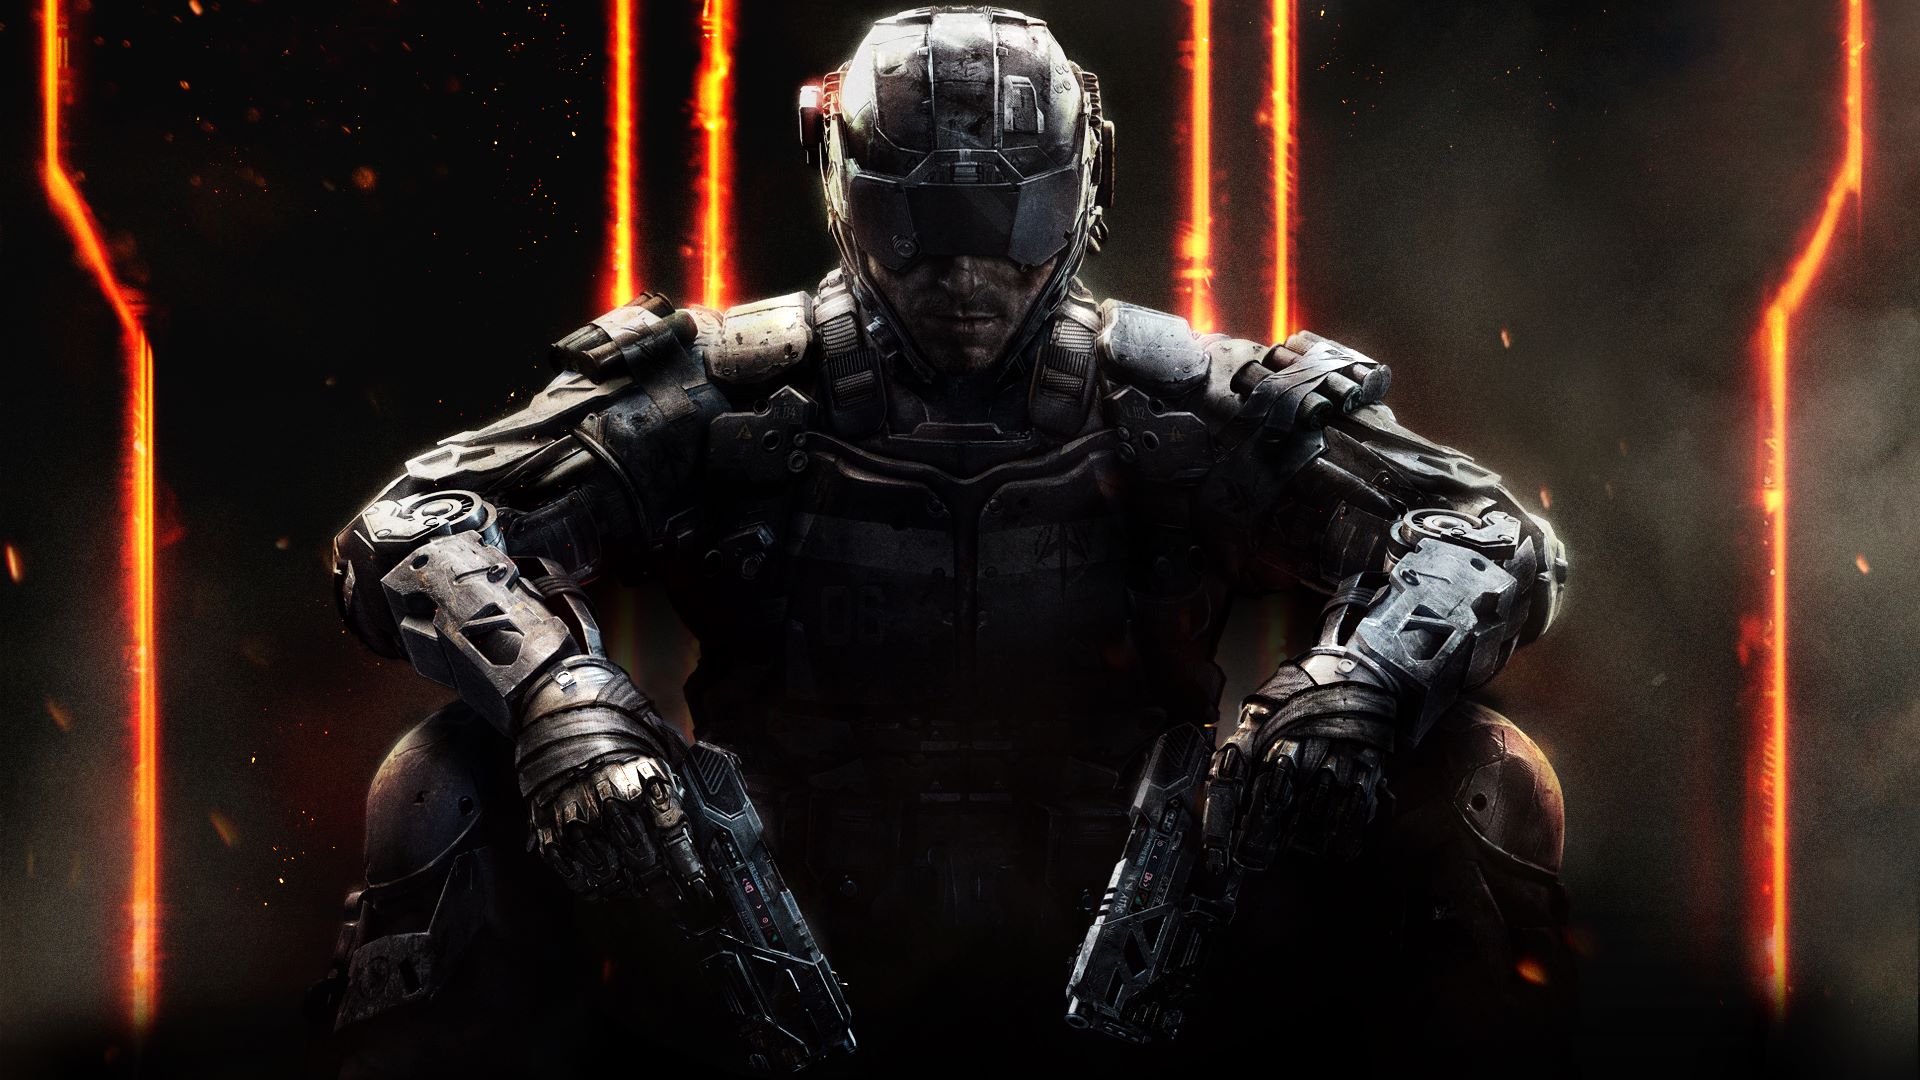 call of duty black ops 3 multiplayer crack pc download